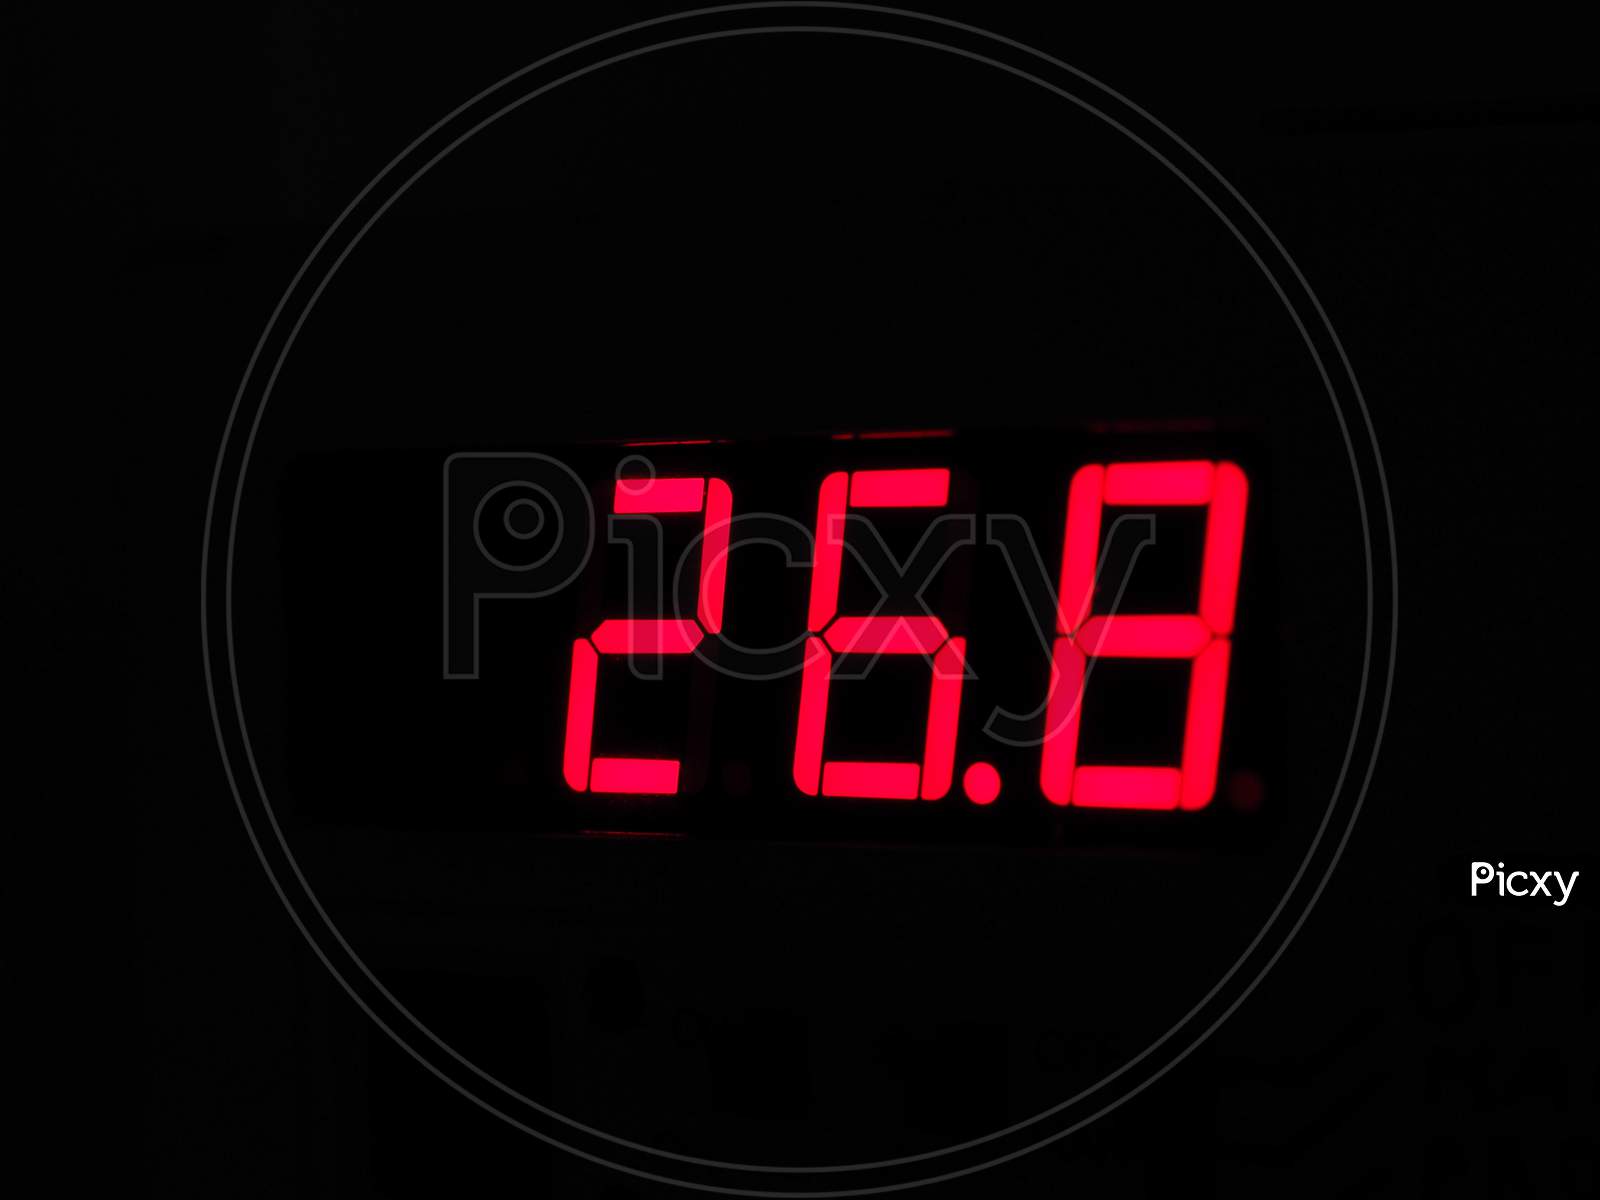 Digital Lcd Display Of Thermometer Showing Hot Temperature In Celsius Or Cold Temperature In Fahrenheit Degrees